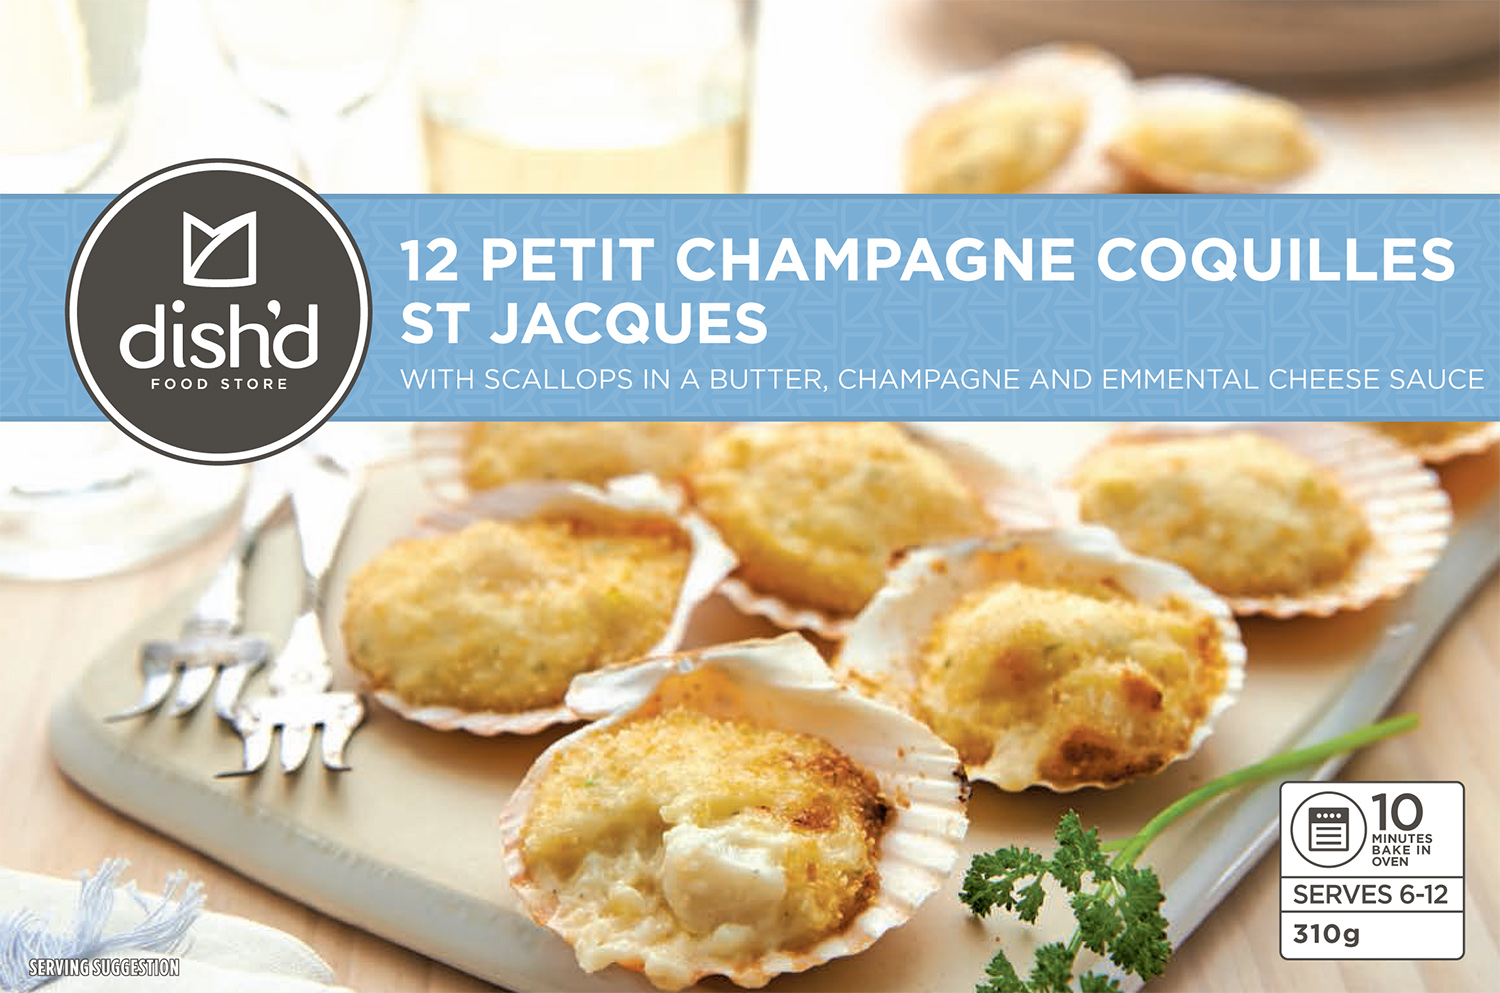 D3 57519 12 Petit Champagne Coquille St Jacques 310g_V4.jpg